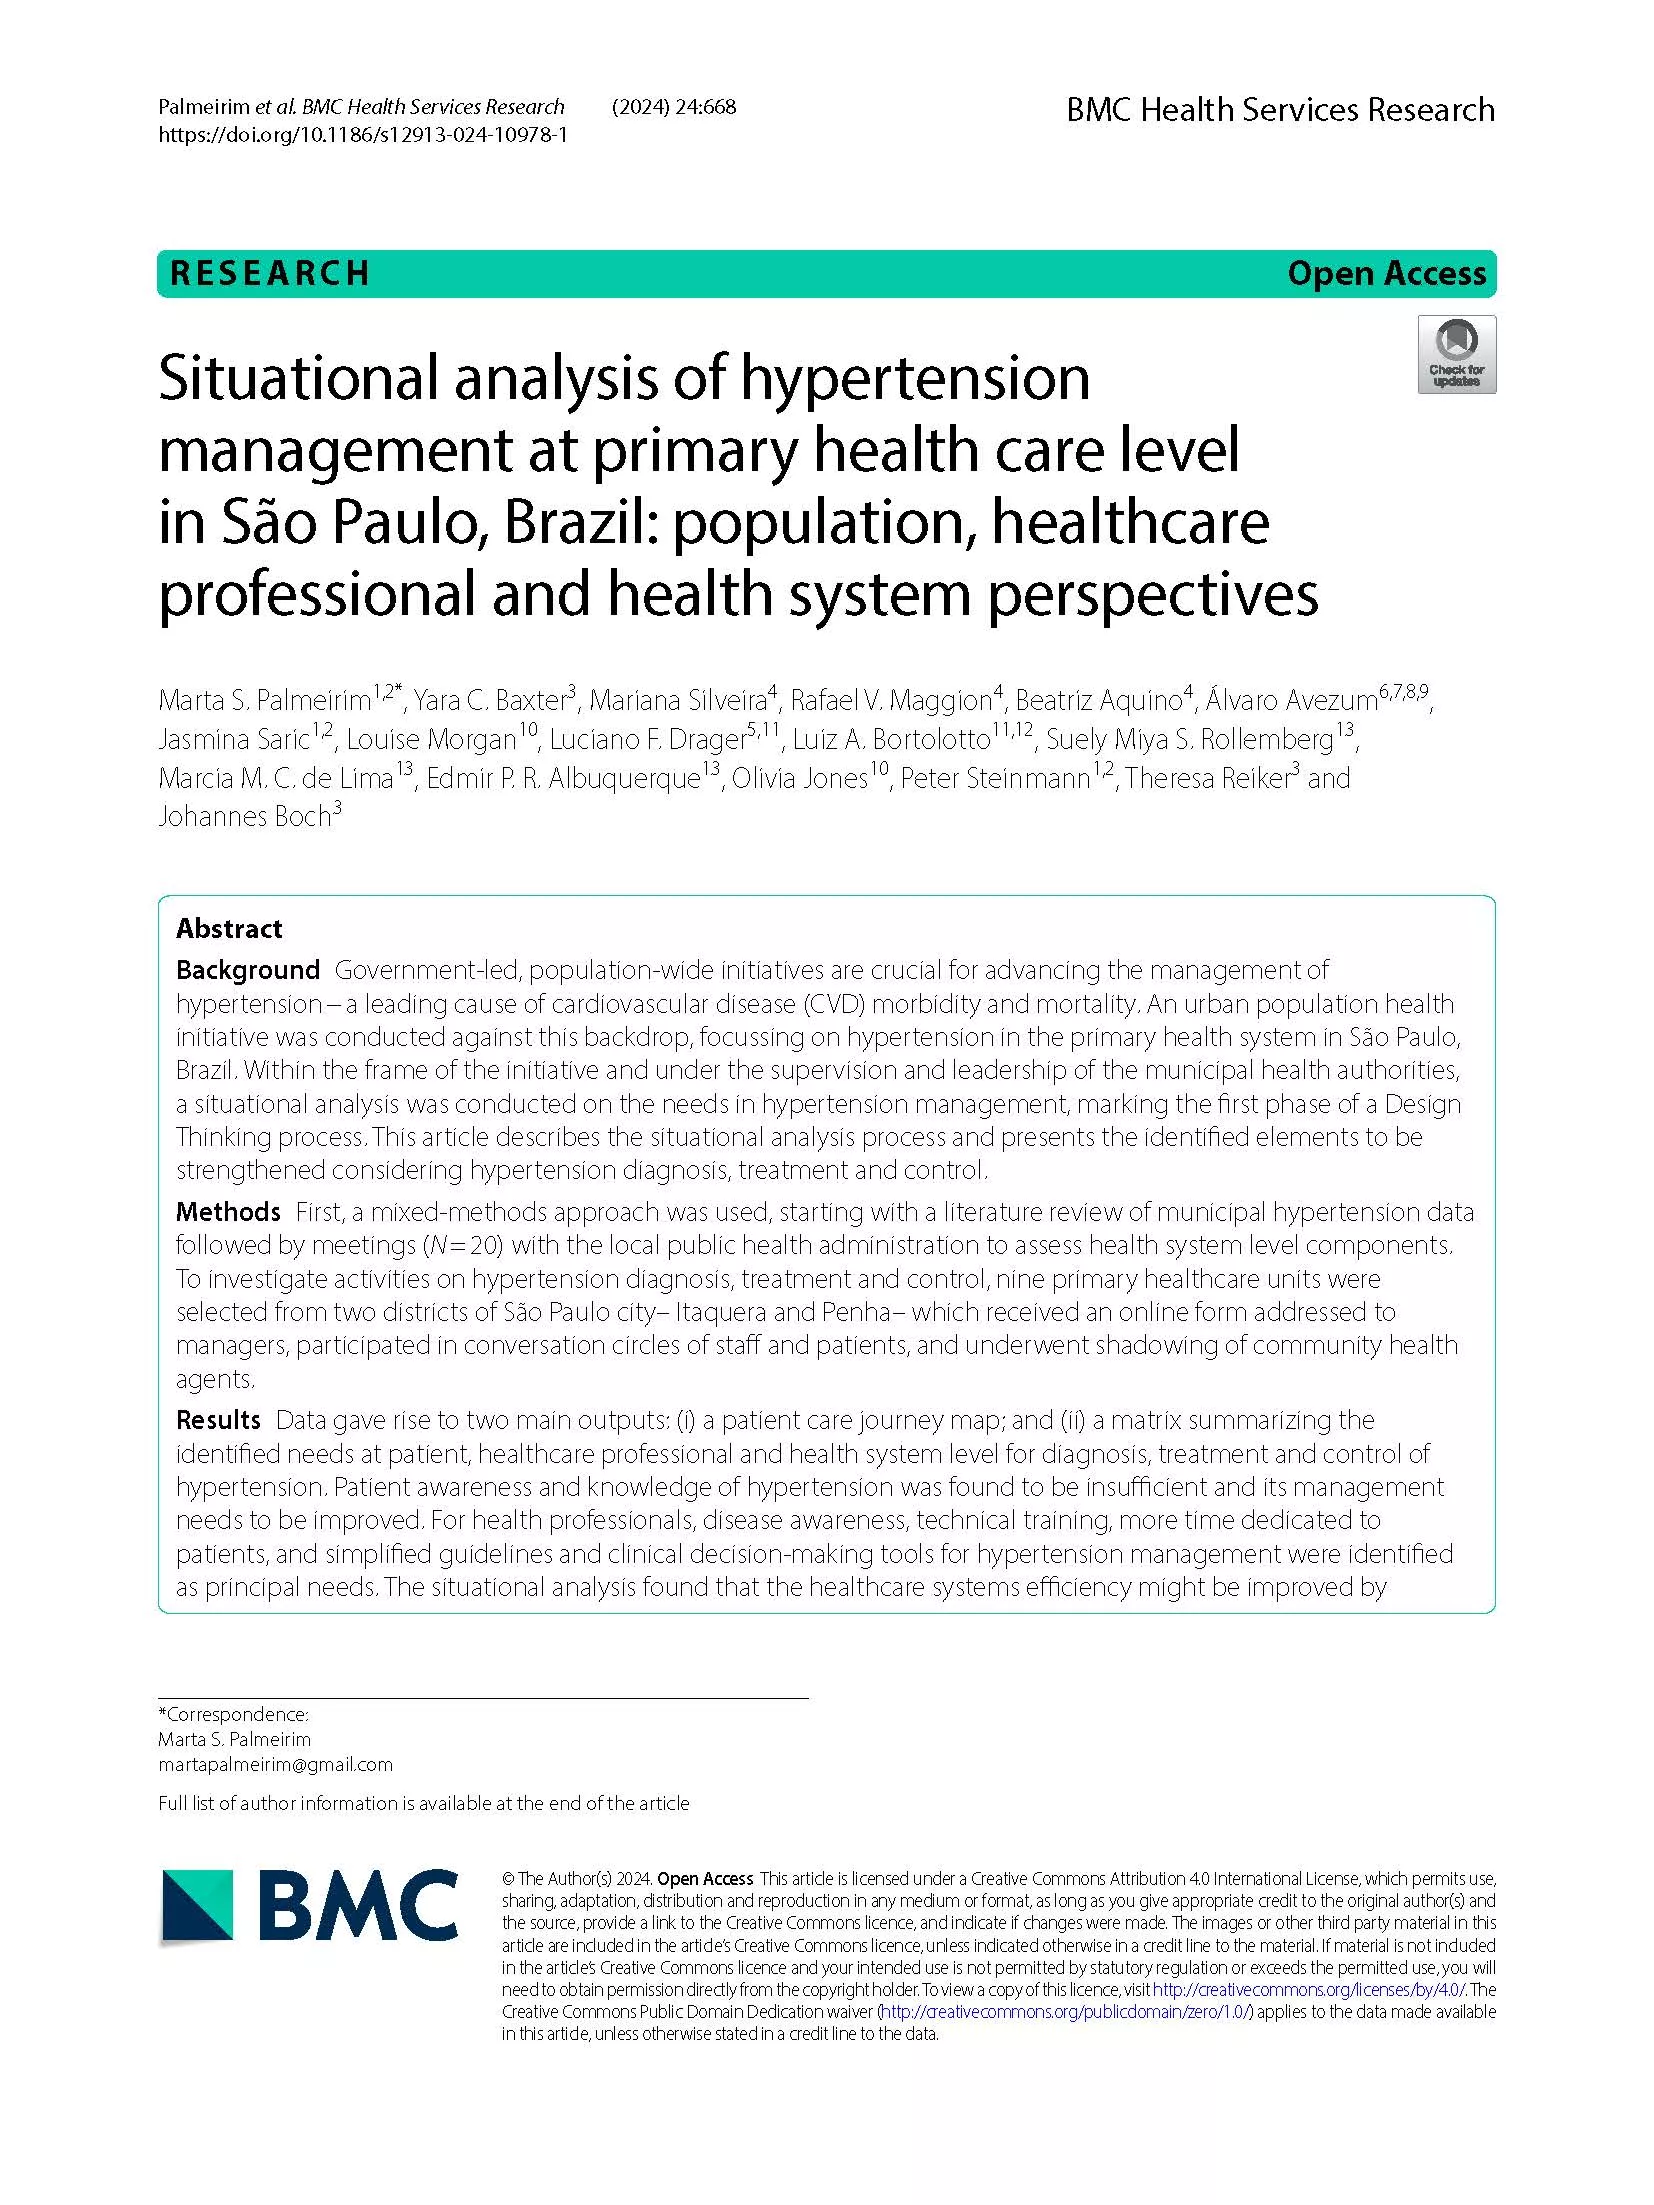 situational-analysis-of-hypertension-management-at-primary-health-care-level-in-sao-paulo-brazil